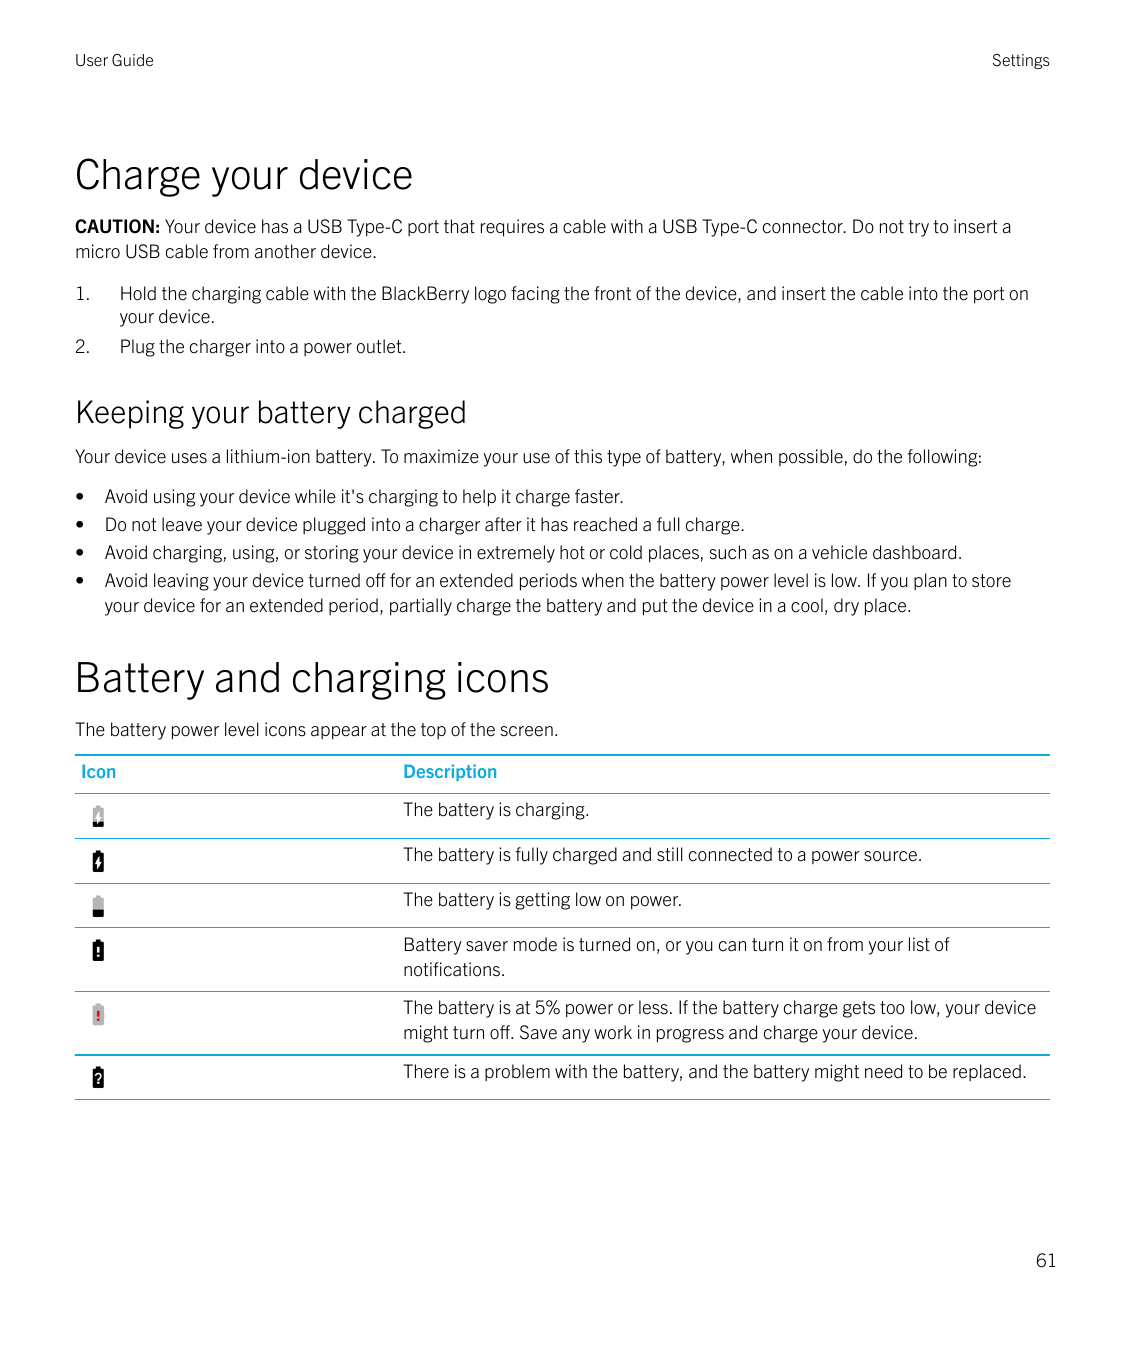 User GuideSettingsCharge your deviceCAUTION: Your device has a USB Type-C port that requires a cable with a USB Type-C connector